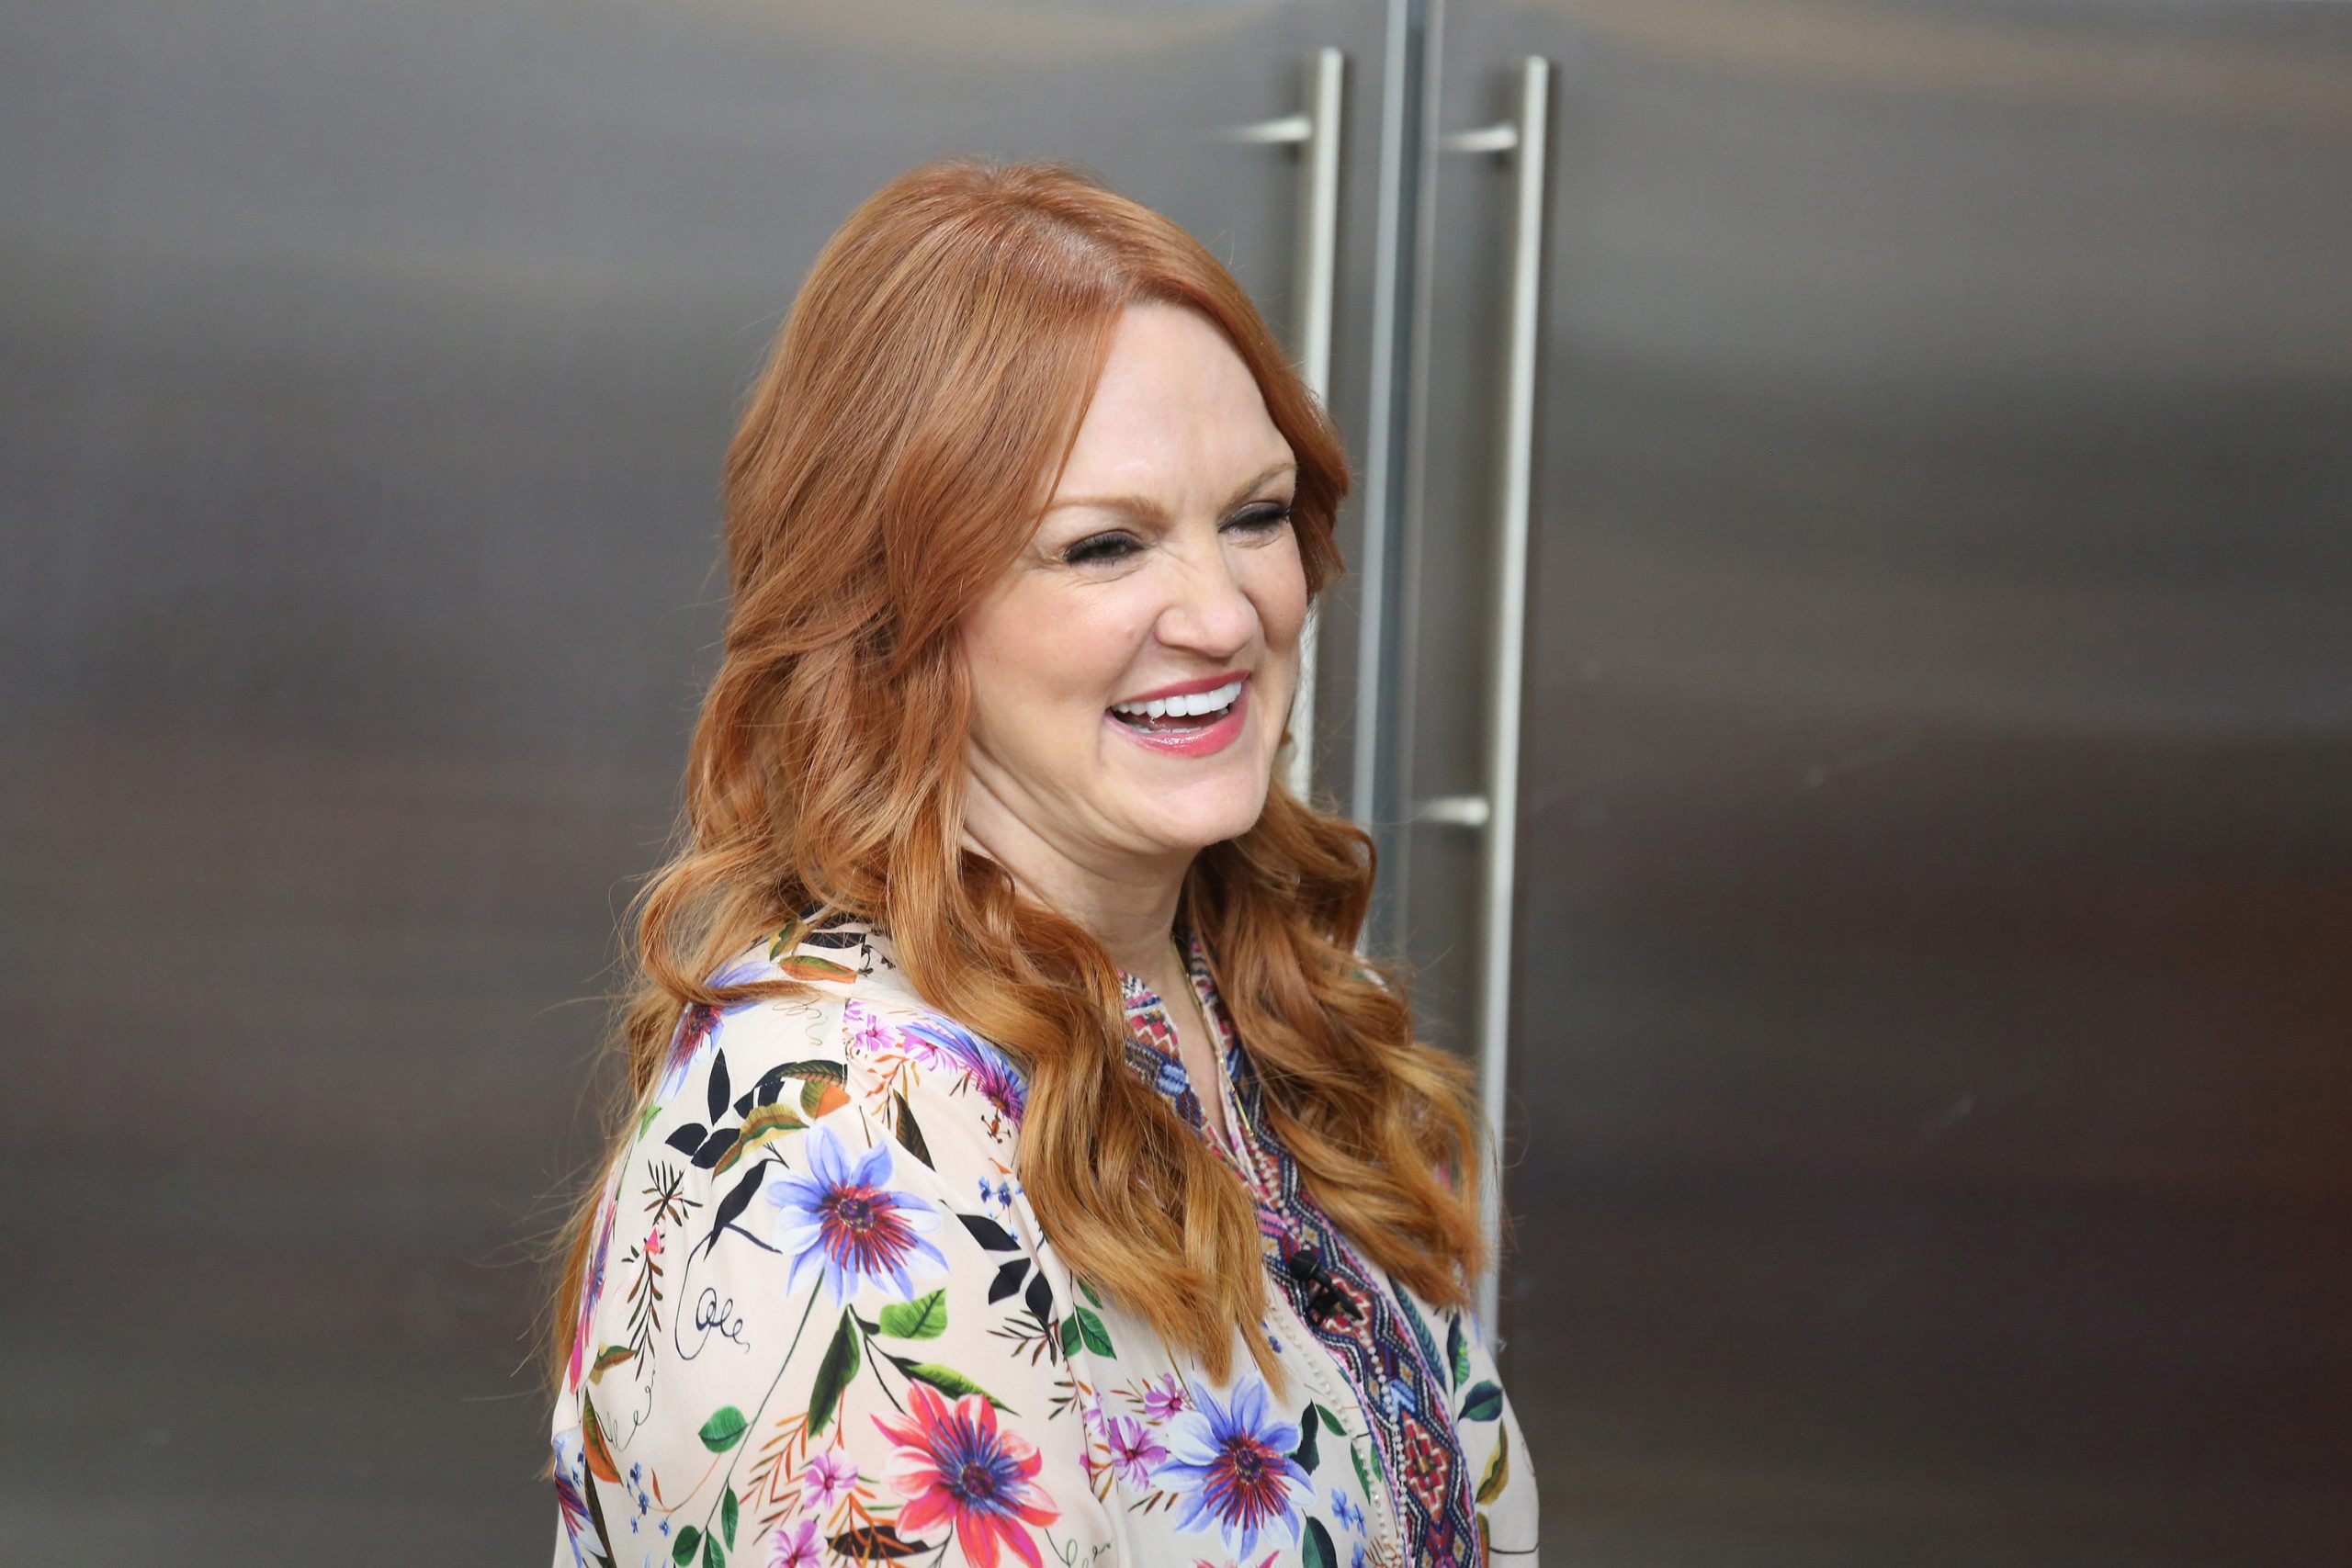 Celebrity chef Ree Drummond wears a multi-pattern print blouse in this photograph.